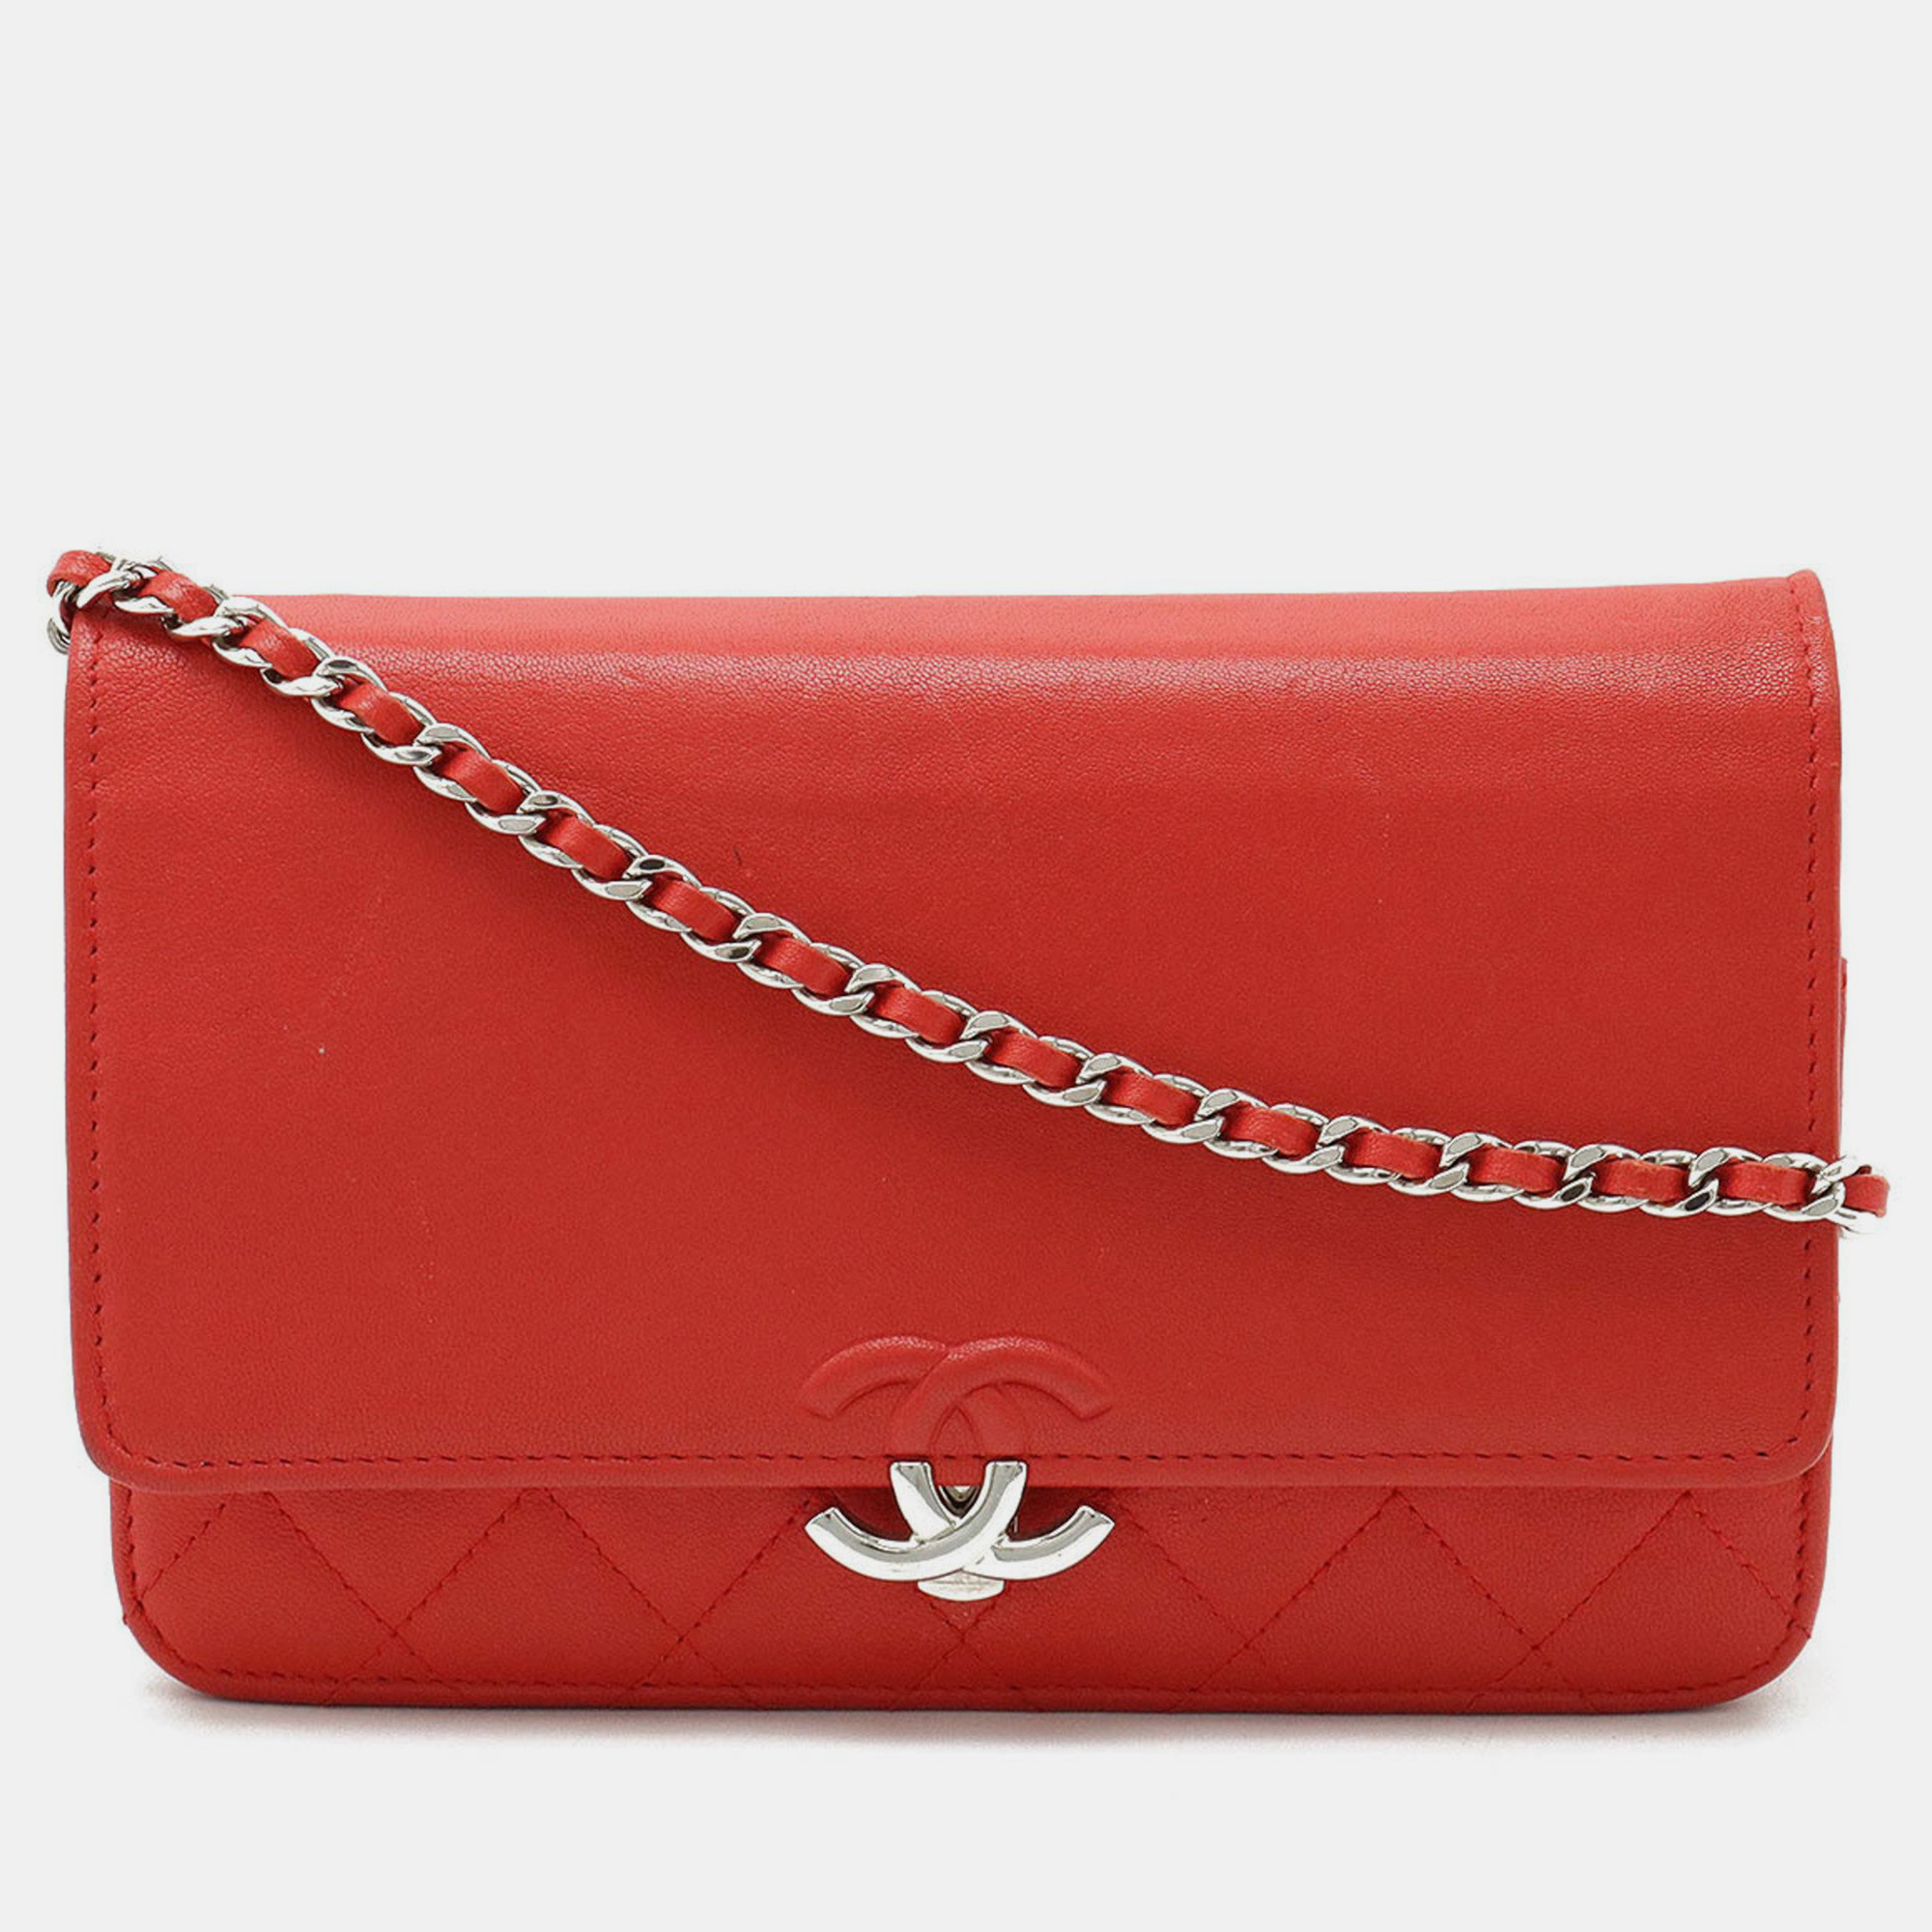 Chanel red leather quilted wallet on chain